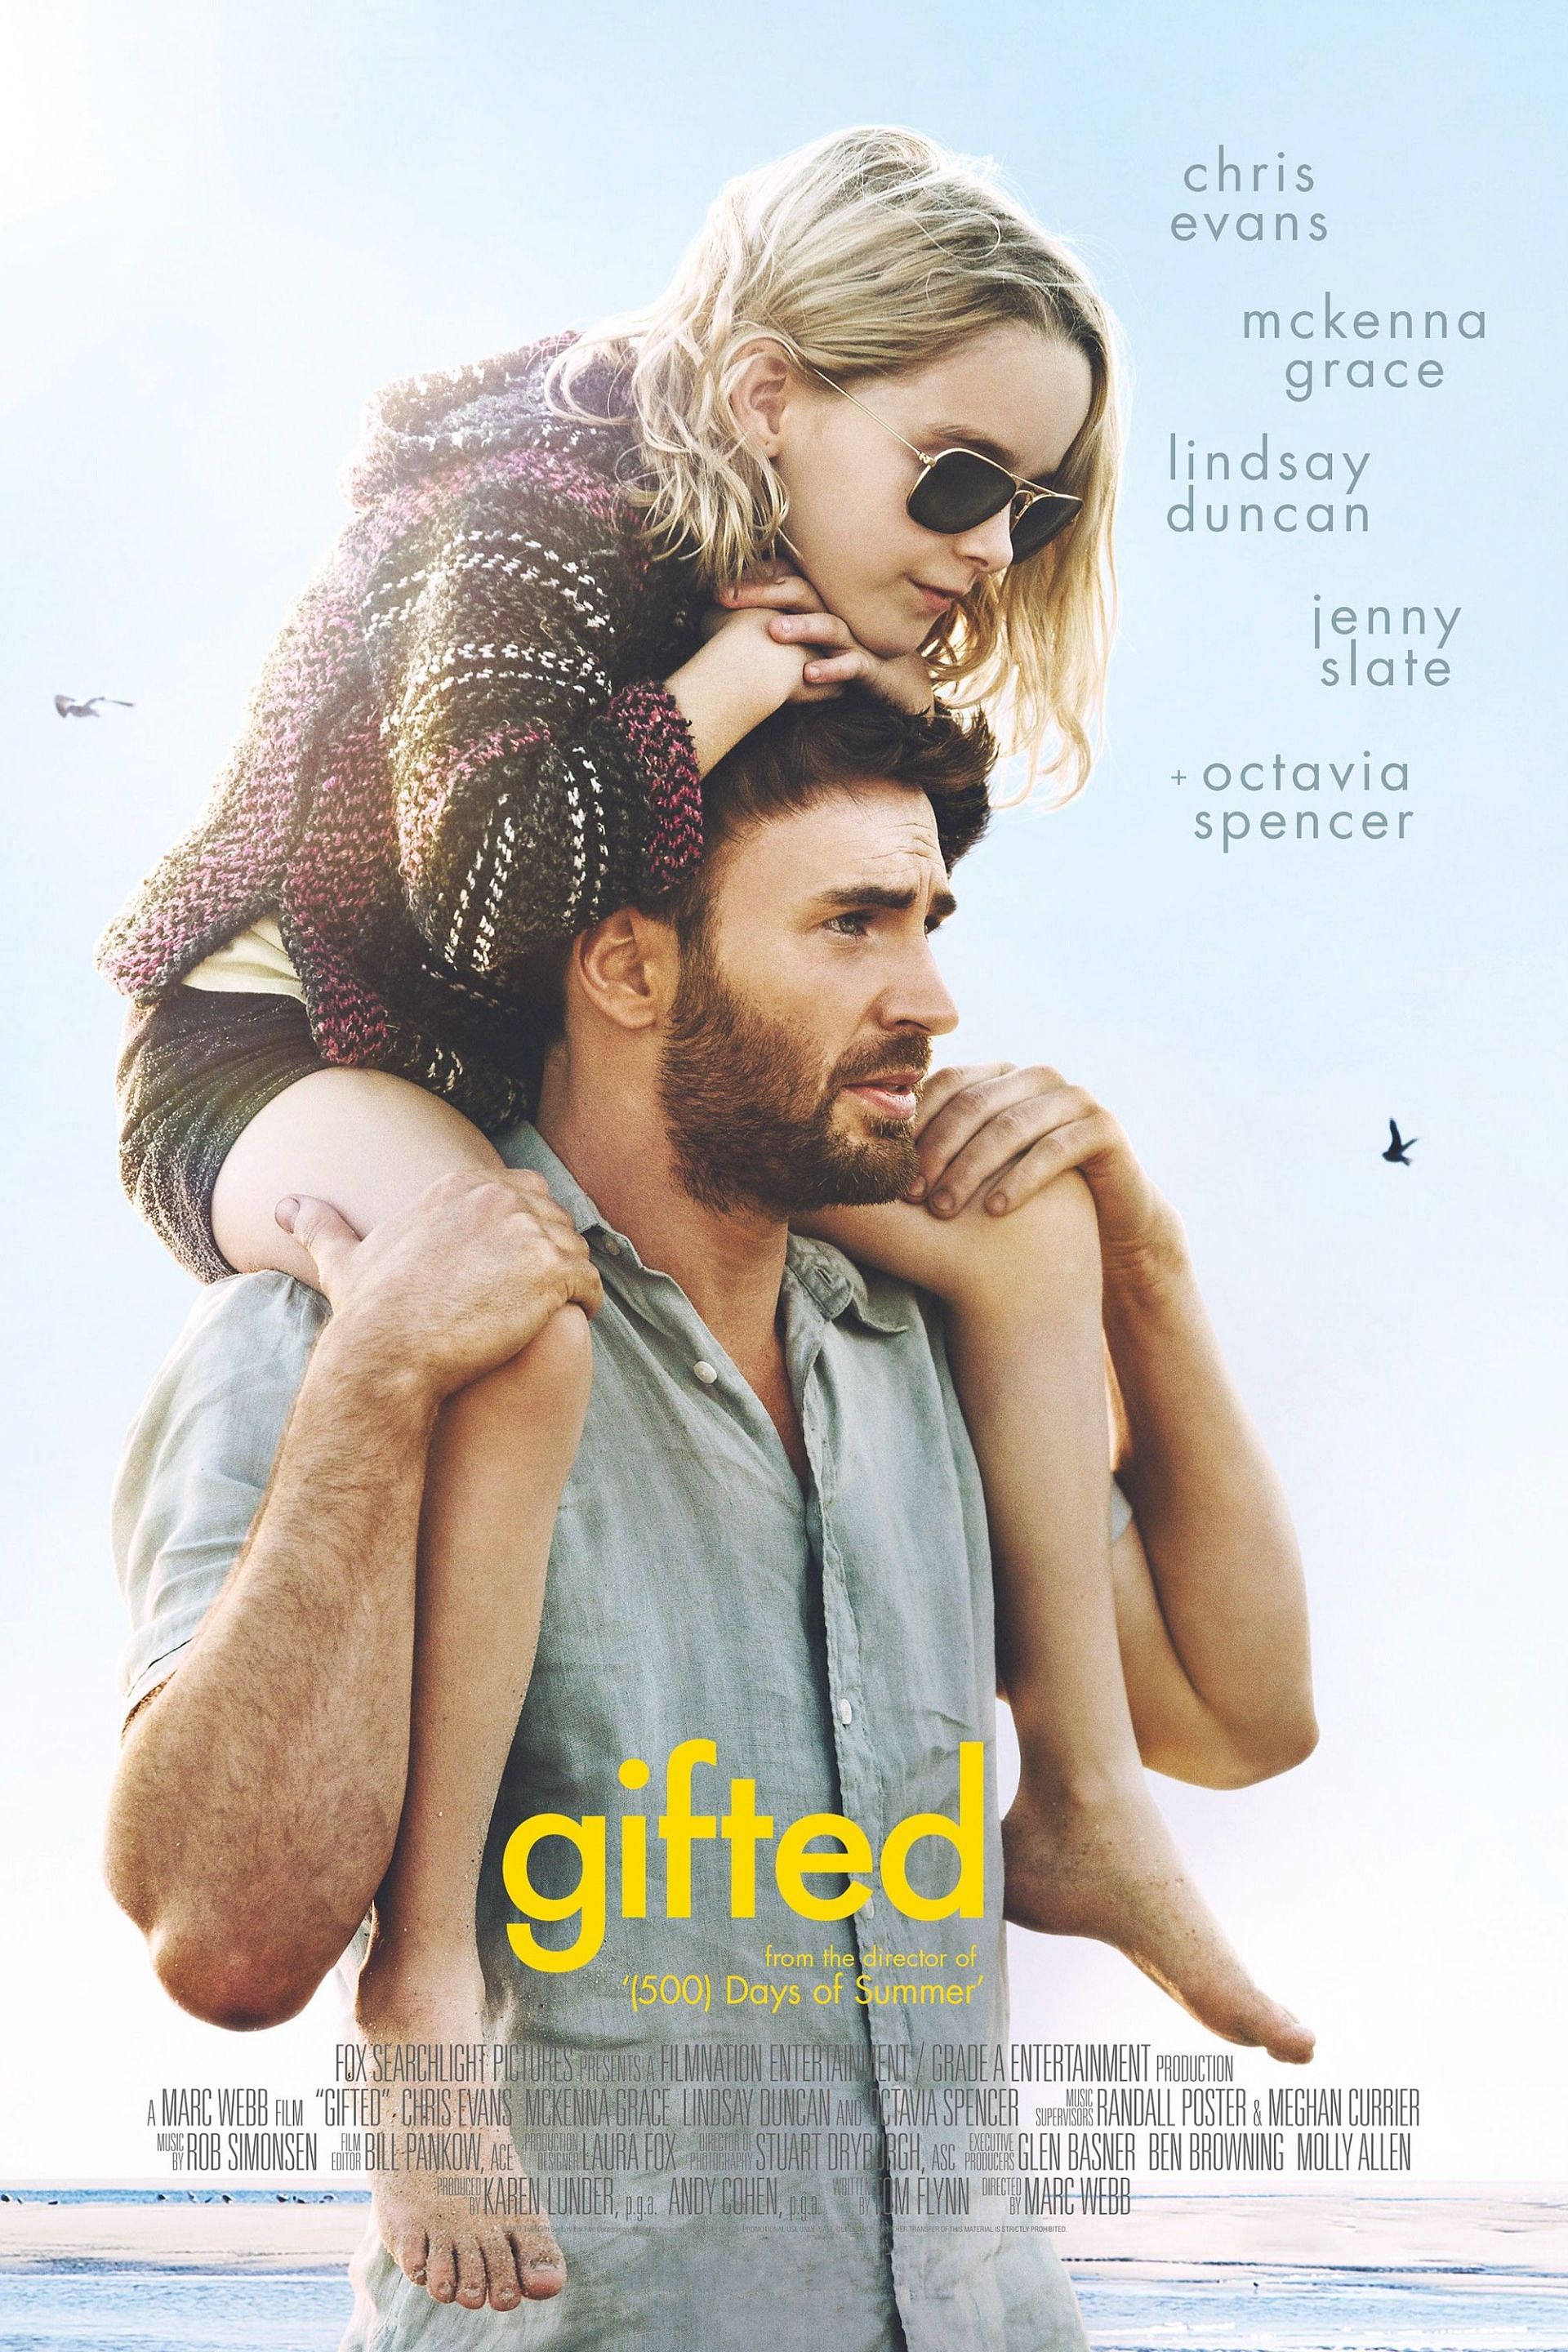 Gifted, 2017 (Image via Searchlight Pictures)